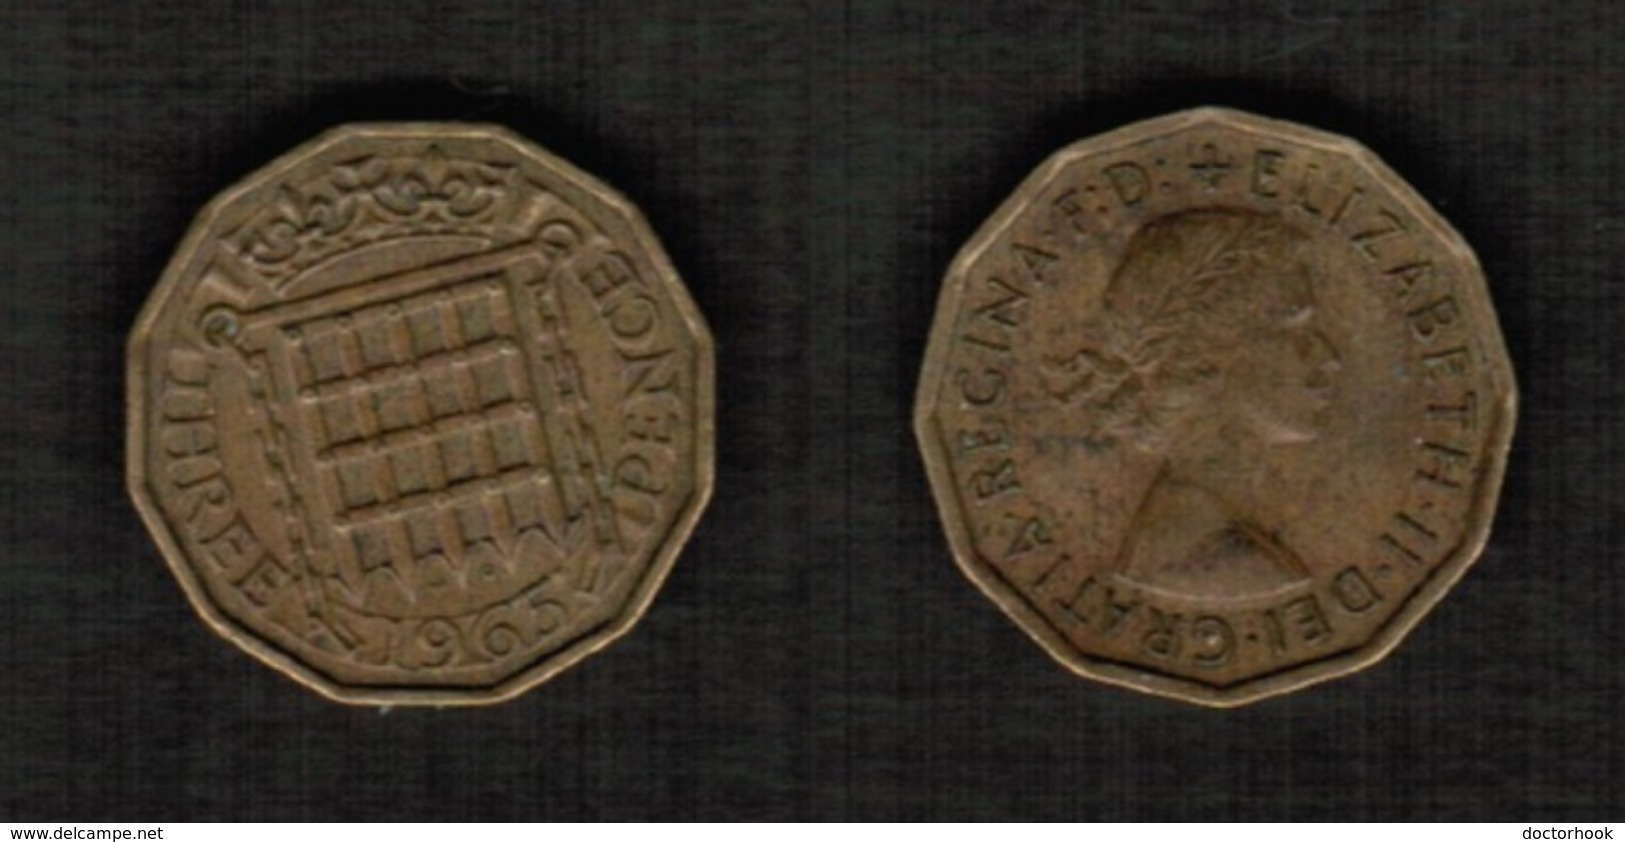 GREAT BRITAIN  3 PENCE 1965 (KM # 900) #5562 - F. 3 Pence